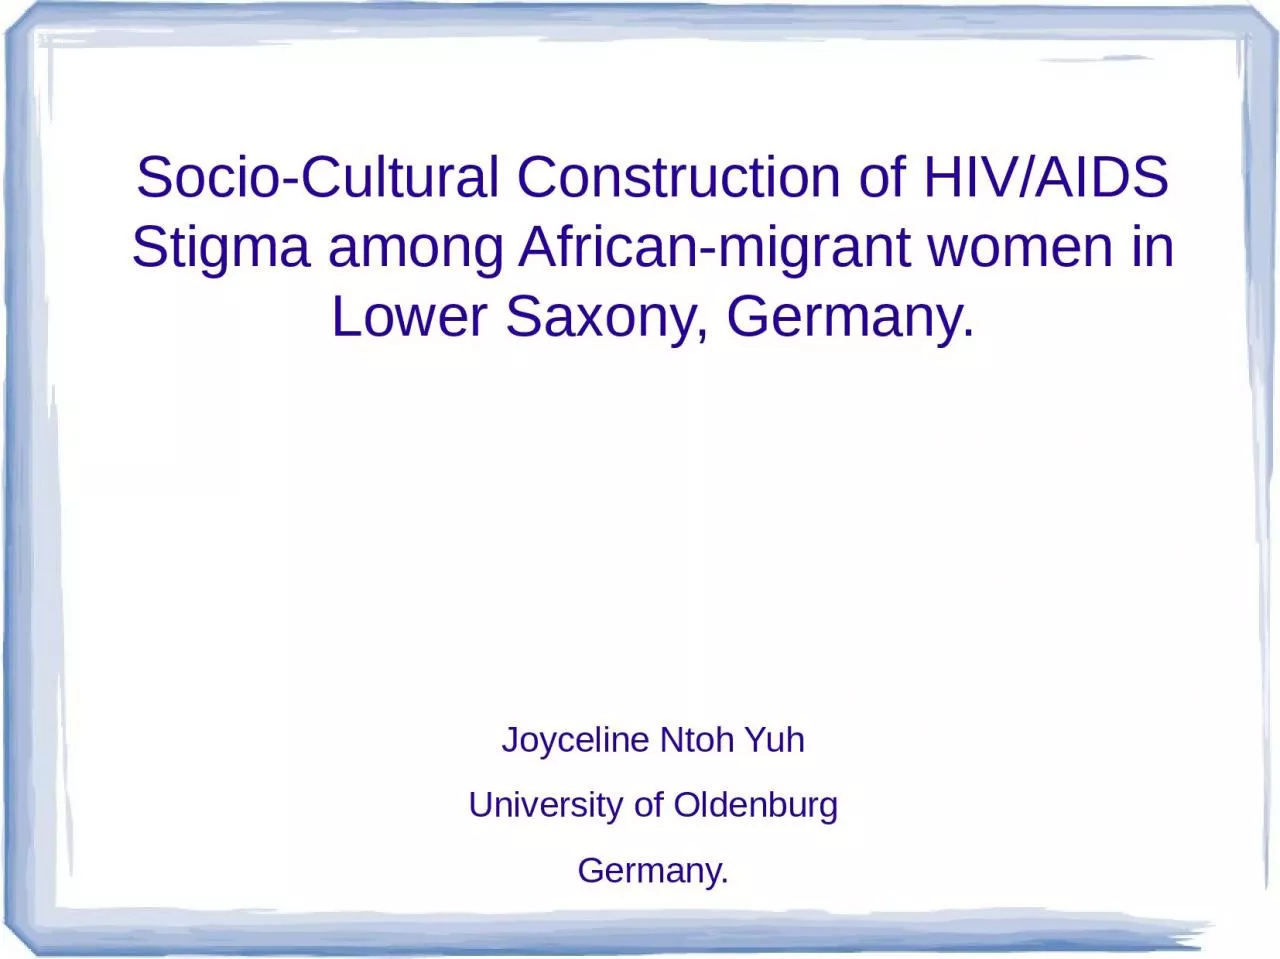 Socio-Cultural Construction of HIV/AIDS Stigma among African-migrant women in Lower Saxony,